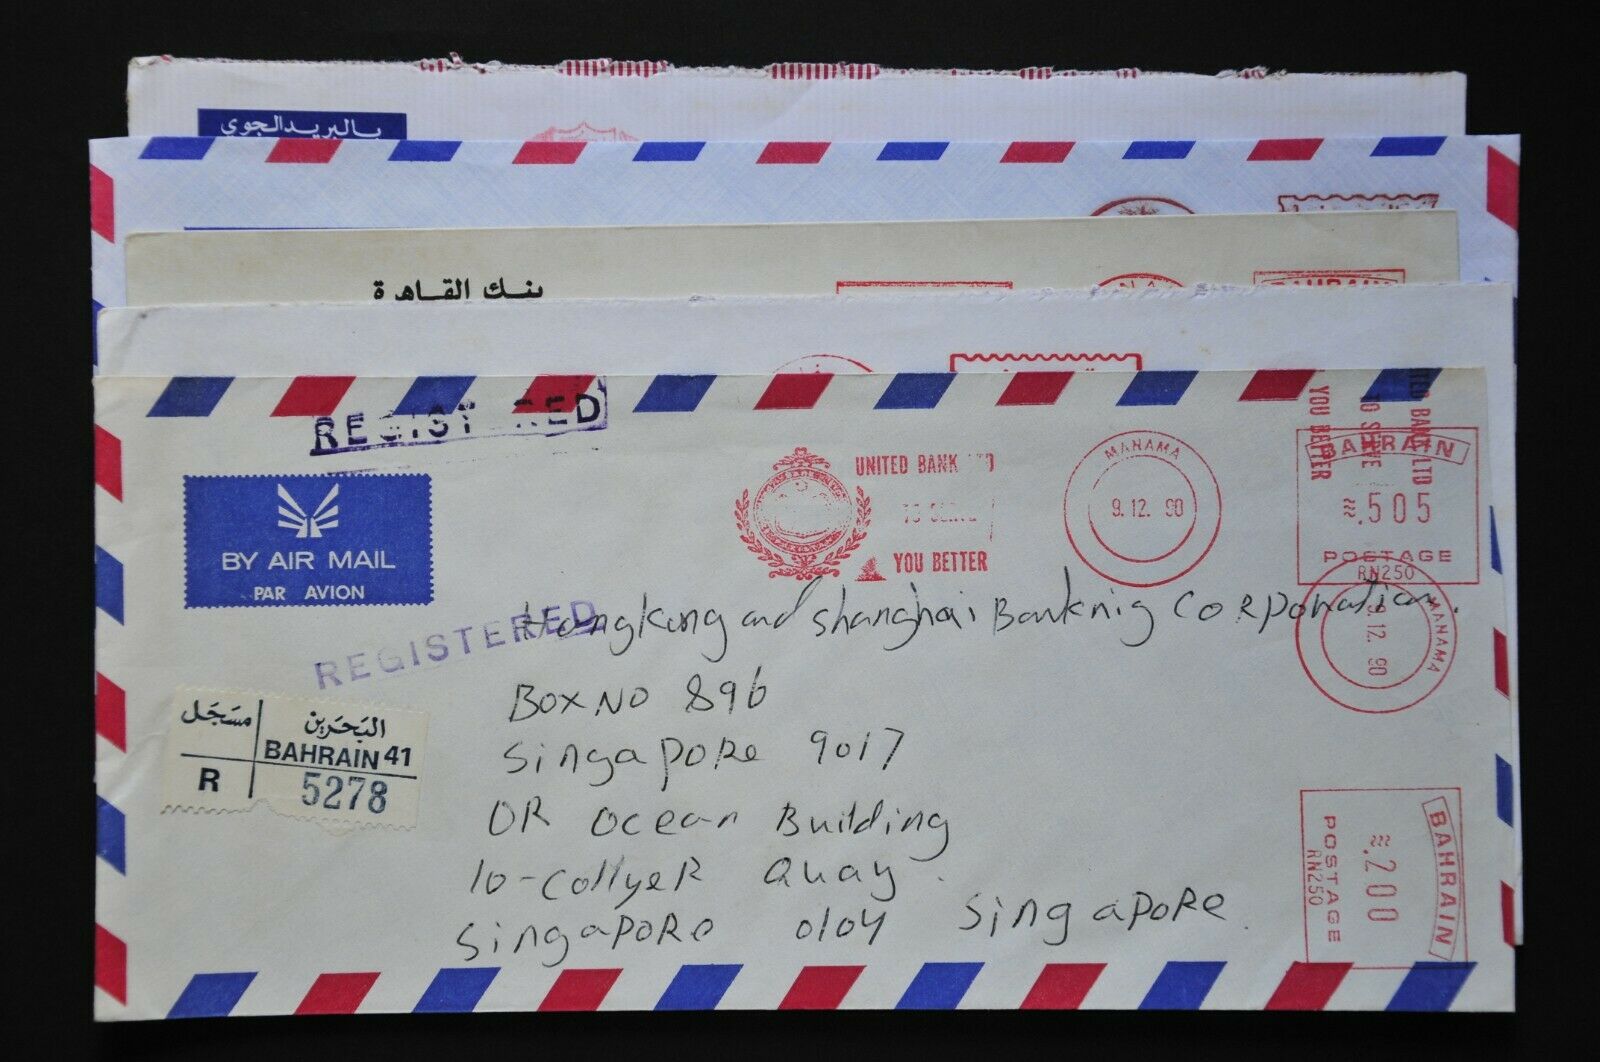 Meter Covers From Yr 1990-94 - 5 Bahrain Registered Covers To Singapore (lm 570)